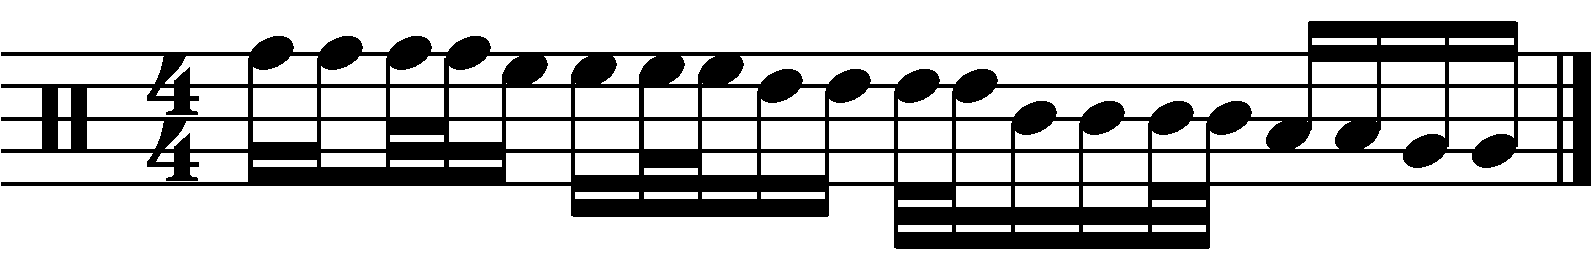 Syncopated 16th note 33334 fills with decorative 32nds